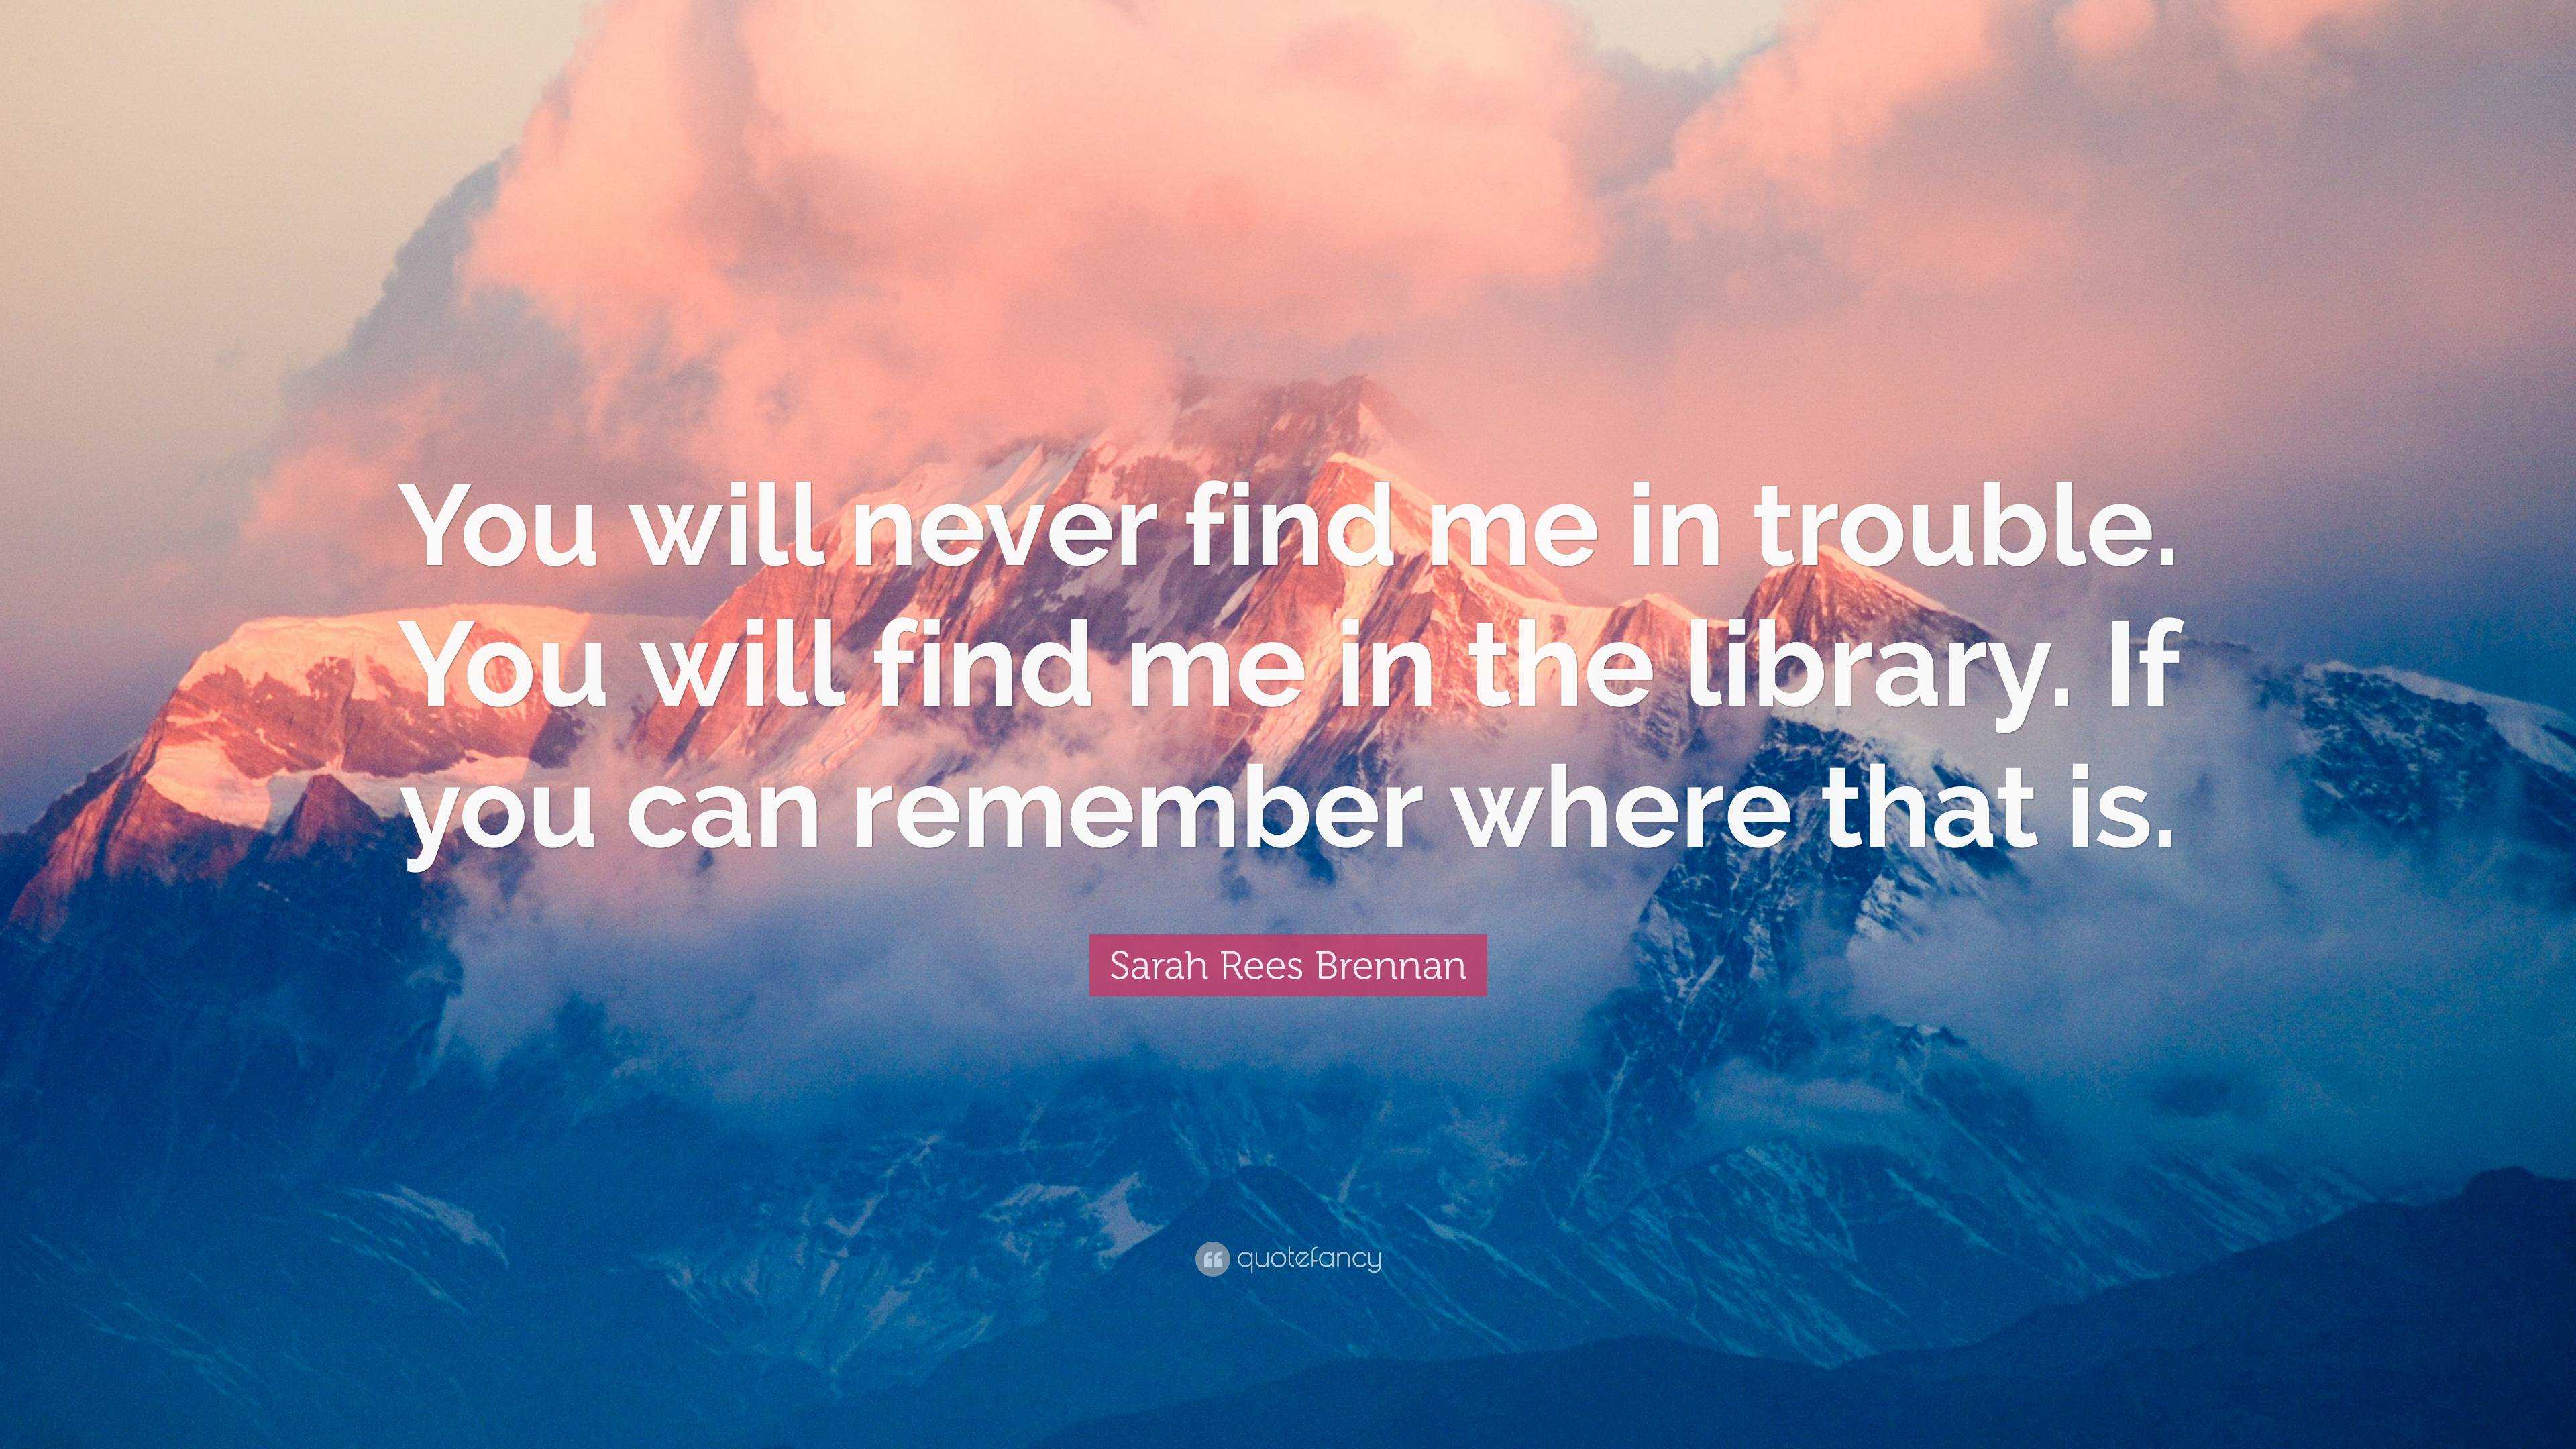 Sarah Rees Brennan Quote: “You will never find me in trouble. You will ...